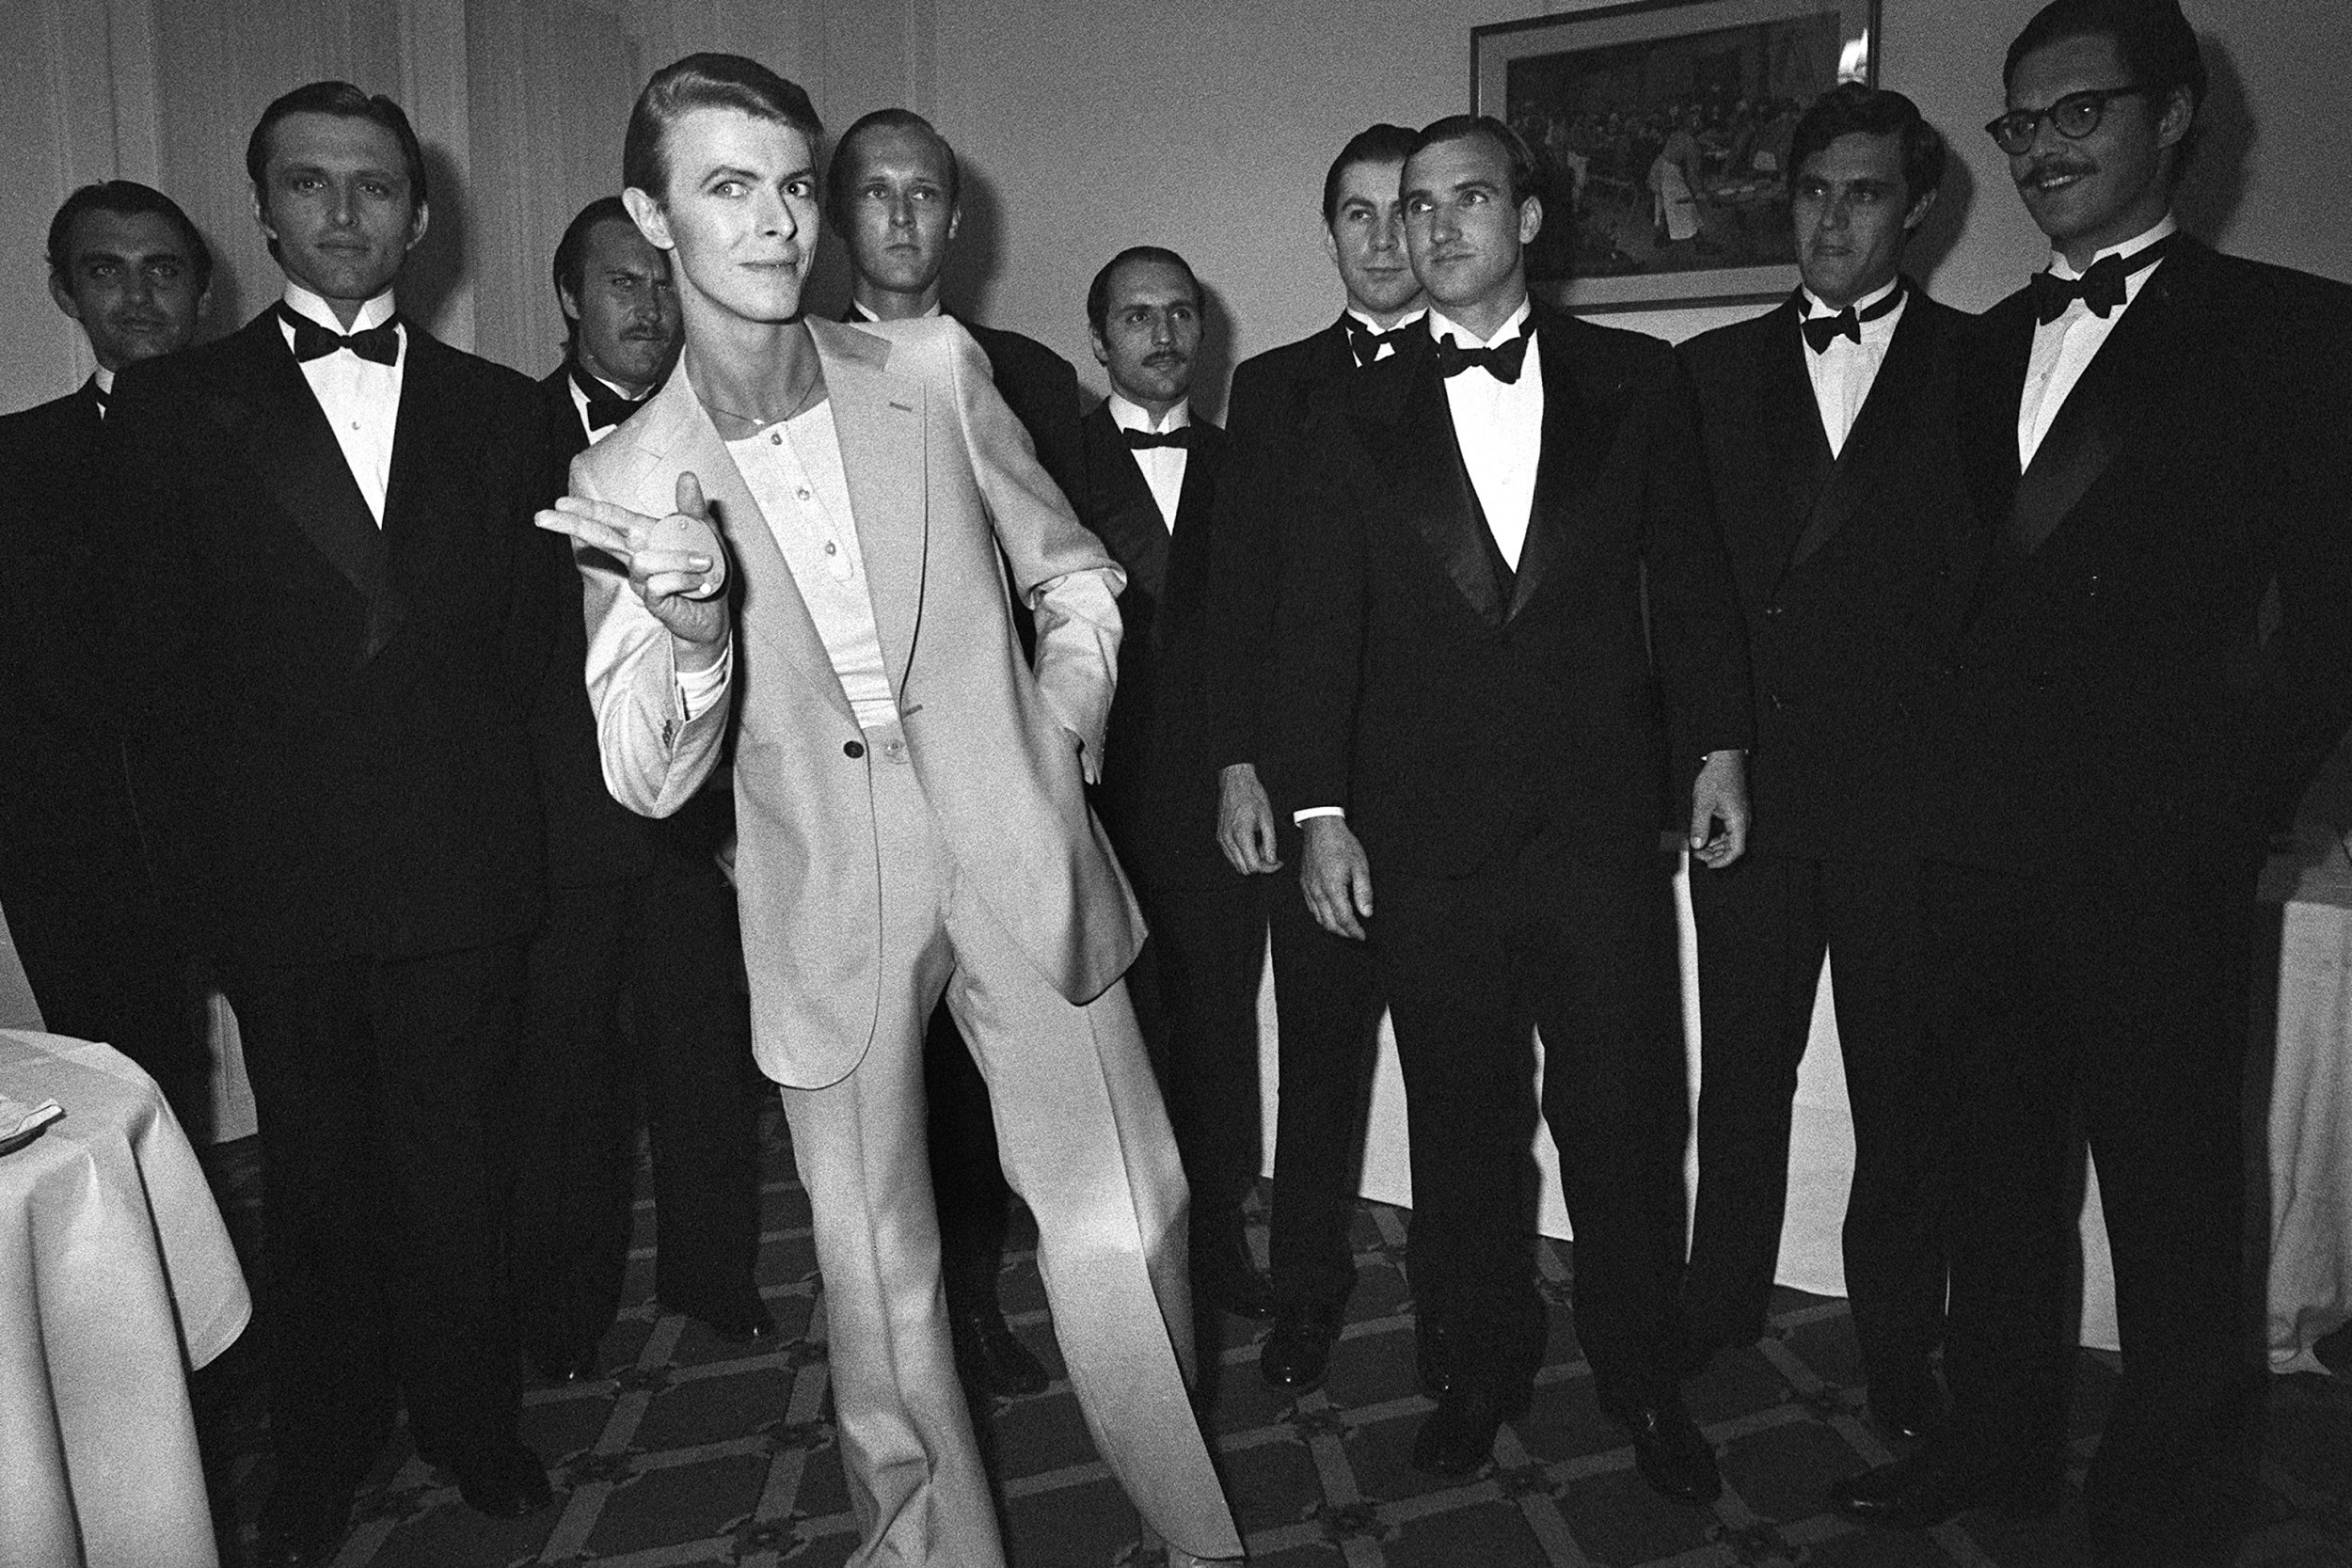 David Bowie Through the Years